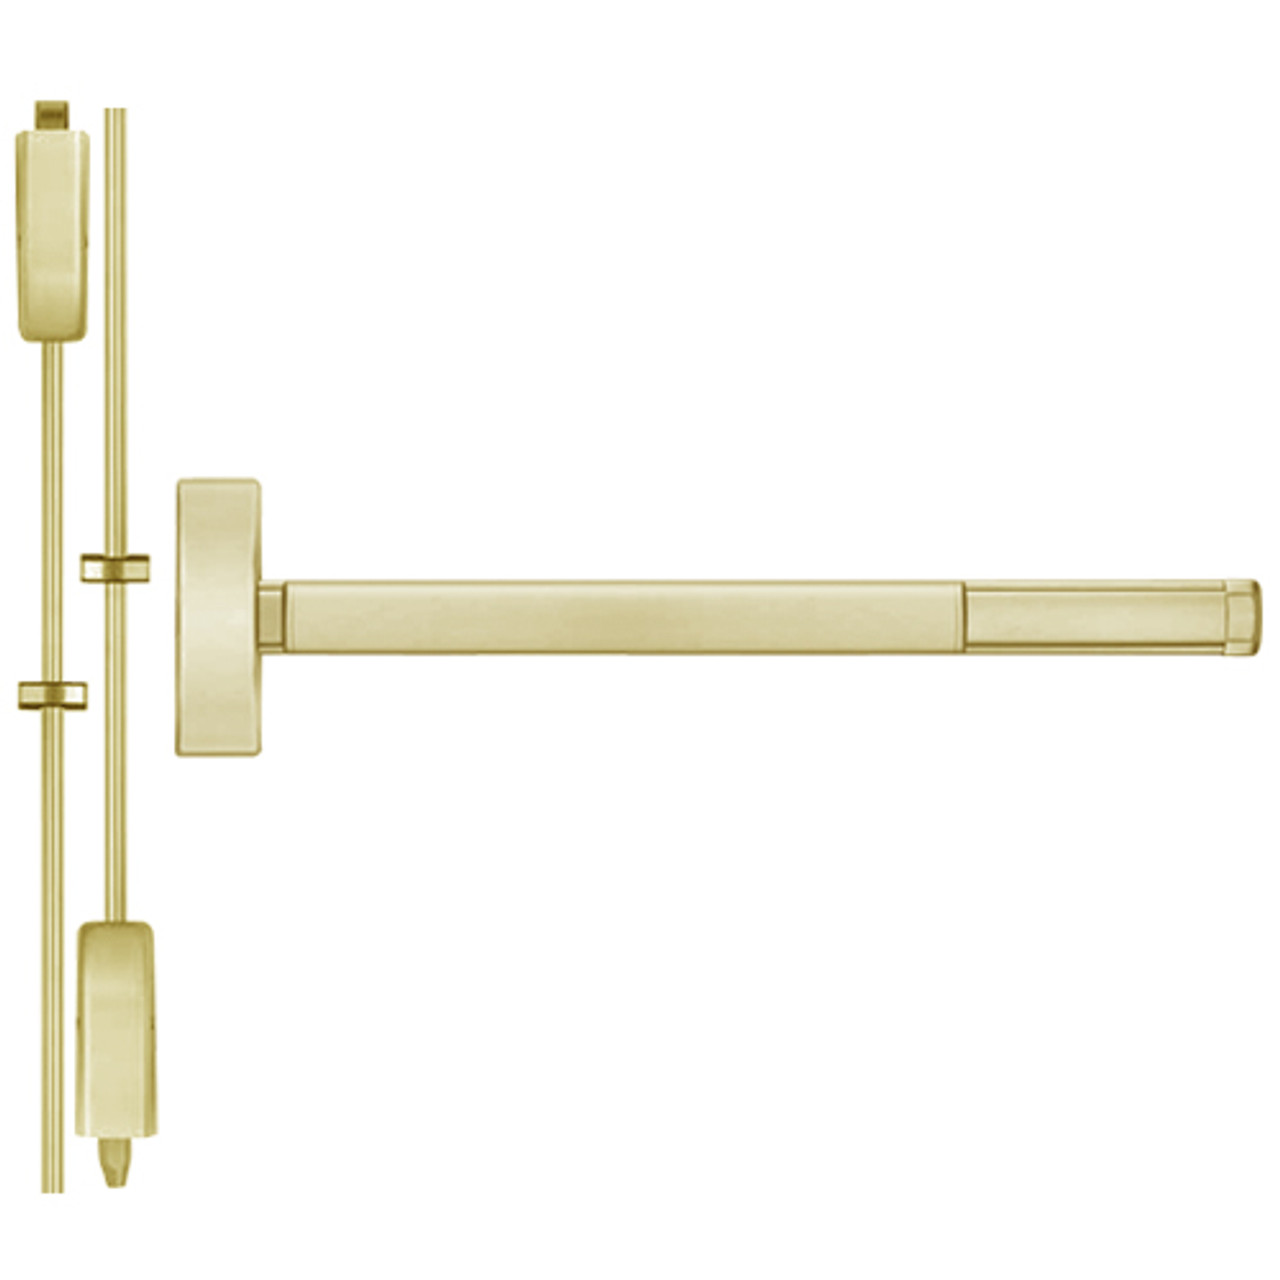 DEFL2208-606-36 PHI 2200 Series Fire Rated Apex Surface Vertical Rod Device with Delayed Egress Prepped for Key Controls Lever/Knob in Satin Brass Finish